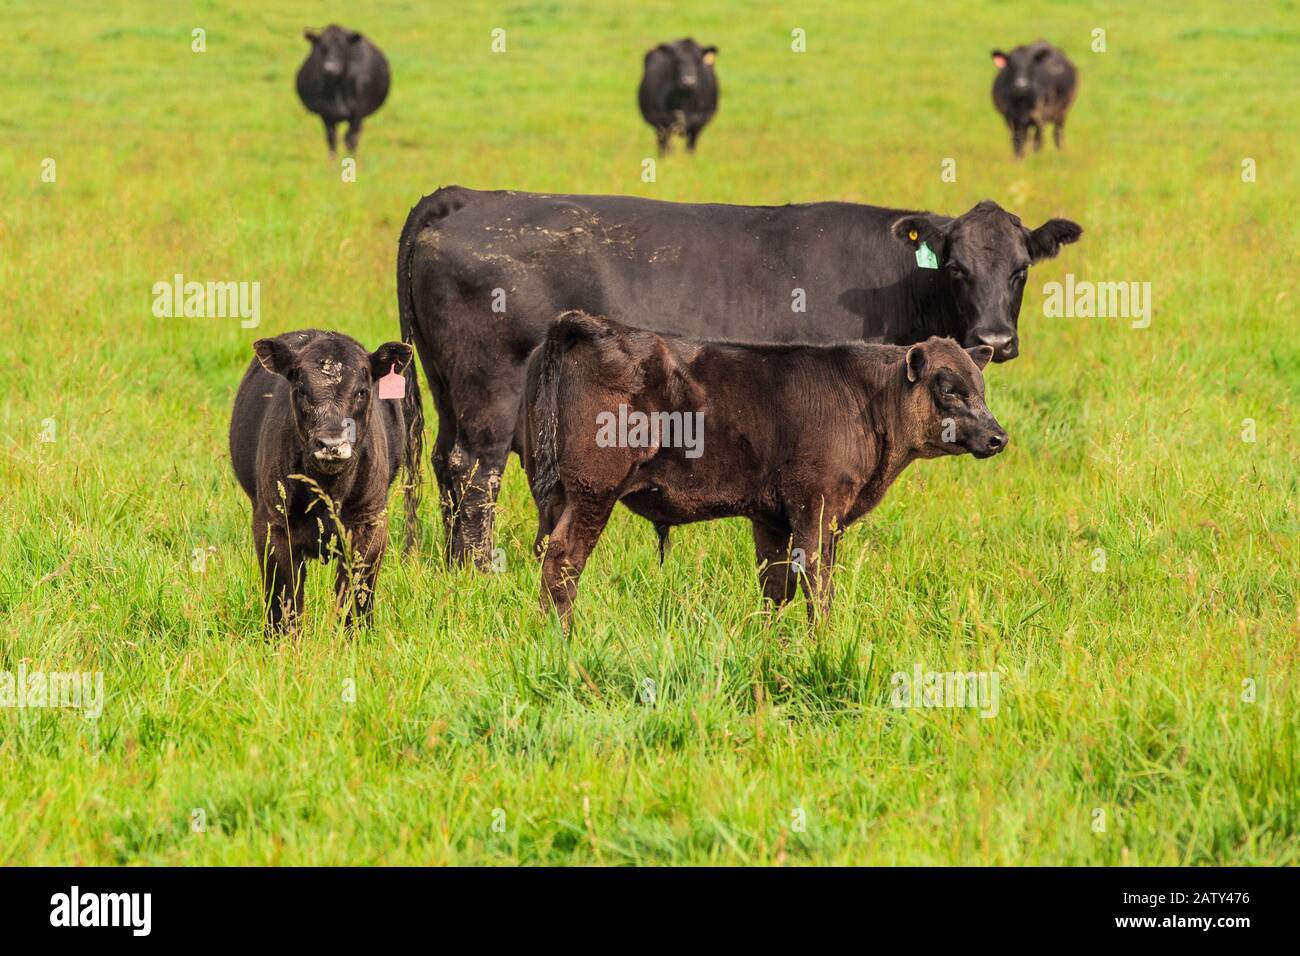 Herd of cattle grazing on the green grass Stock Photo